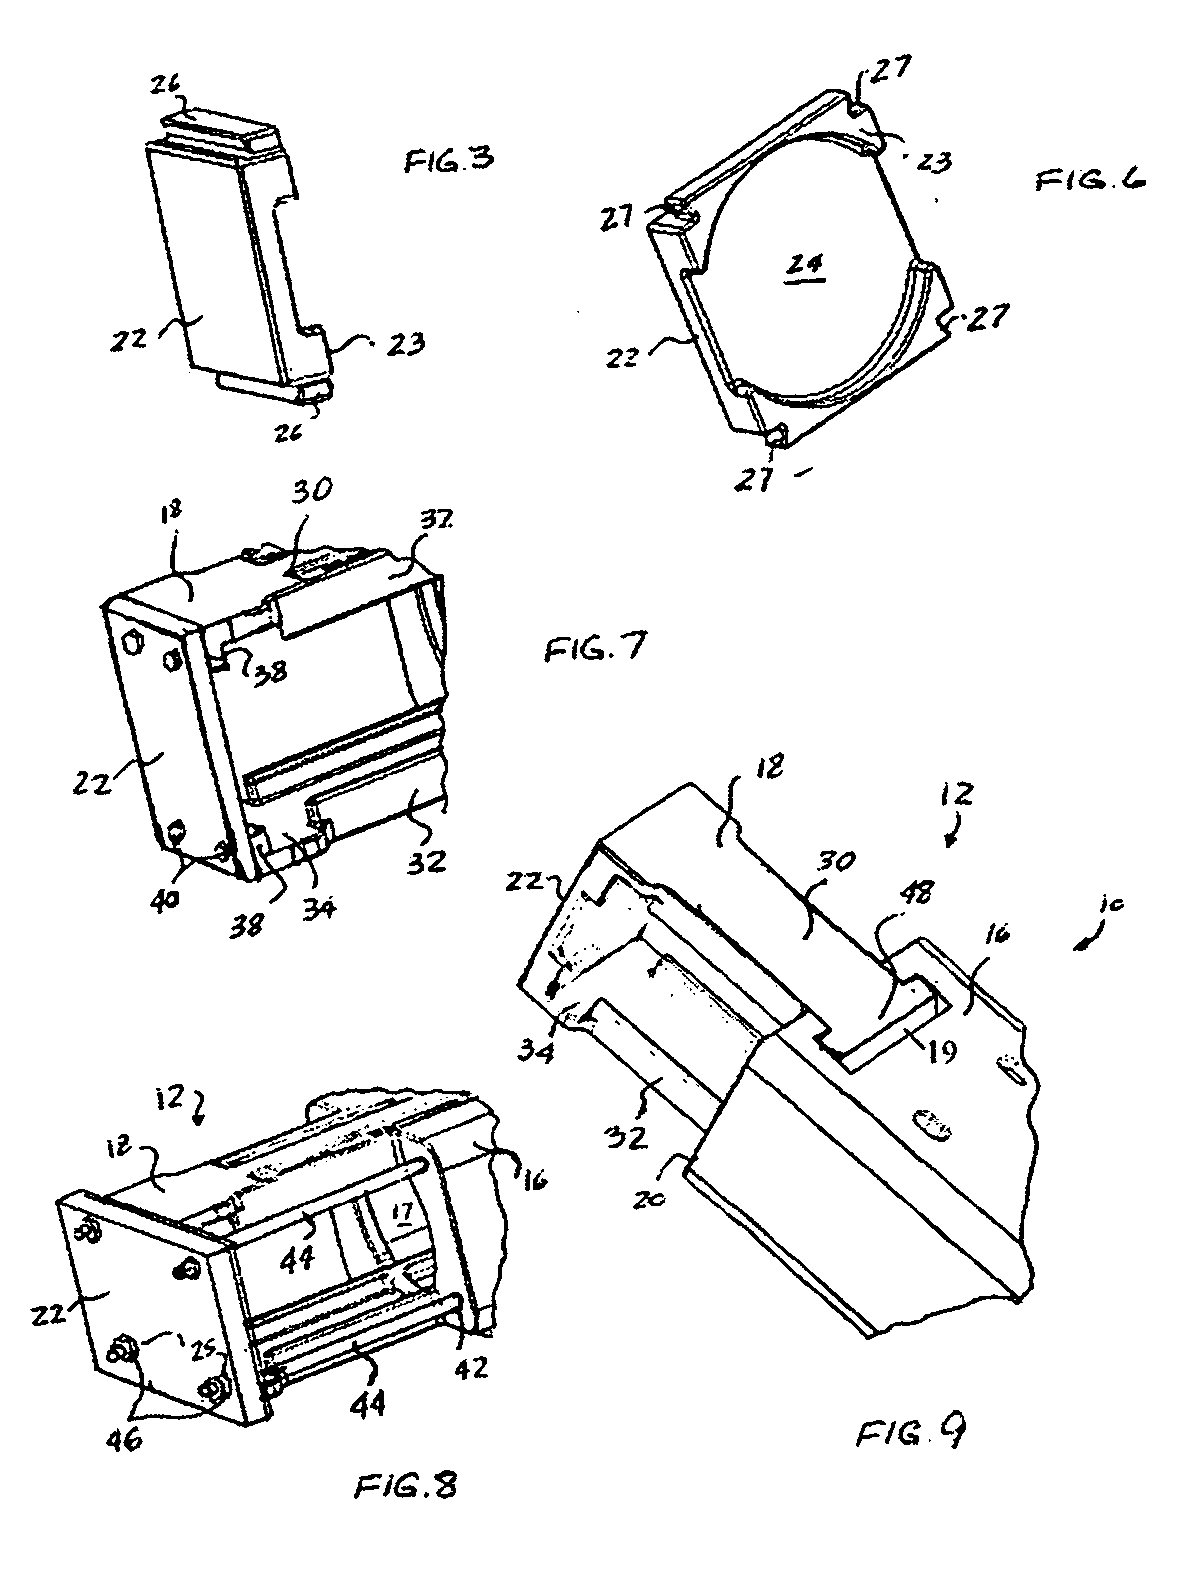 Friction draft gear housing having a removable end wall